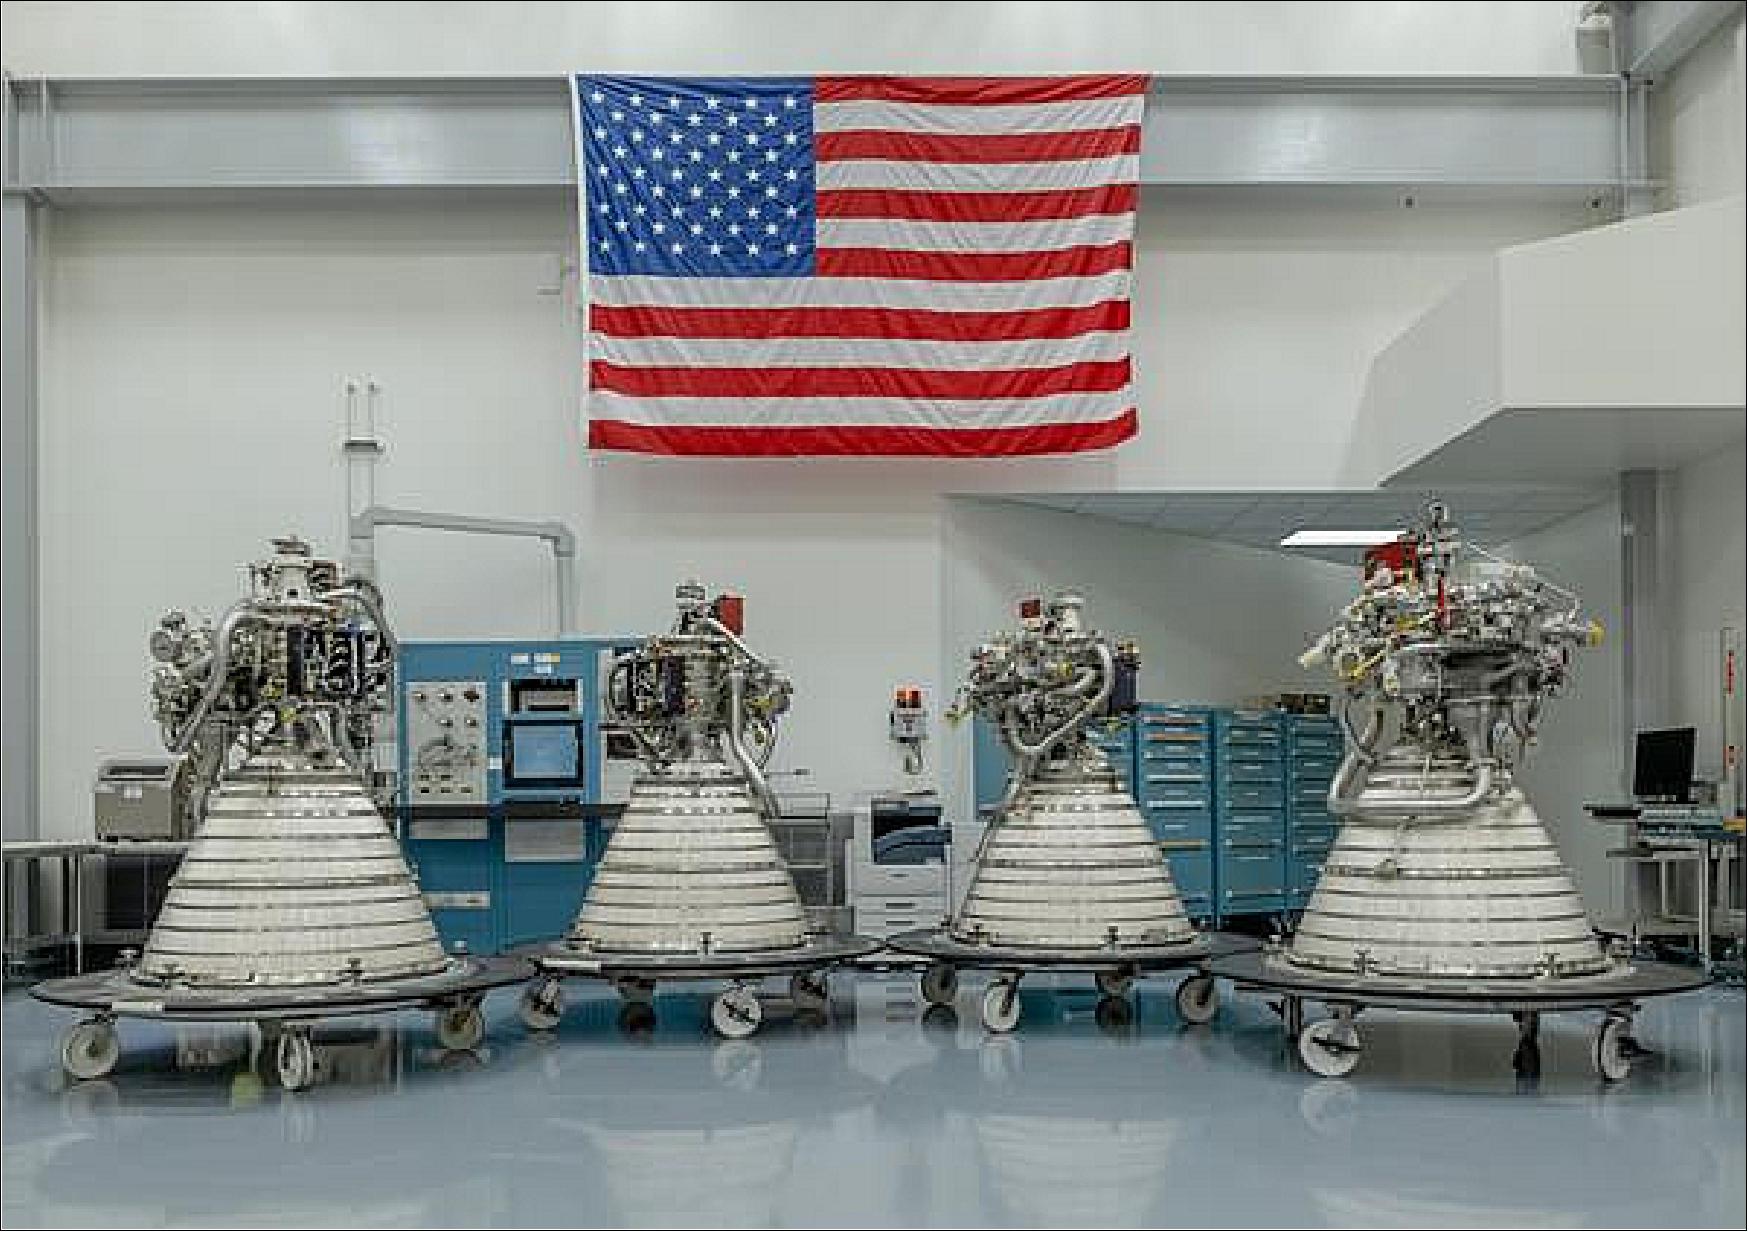 Figure 24: Four Aerojet Rocketdyne RL10 rocket engines – shown here at the company’s facility in West Palm Beach, Florida – were recently delivered to NASA. The engines will be used to help power the upper stage of the agency’s Space Launch System (SLS) rocket (image credit: Aerojet Rocketdyne)